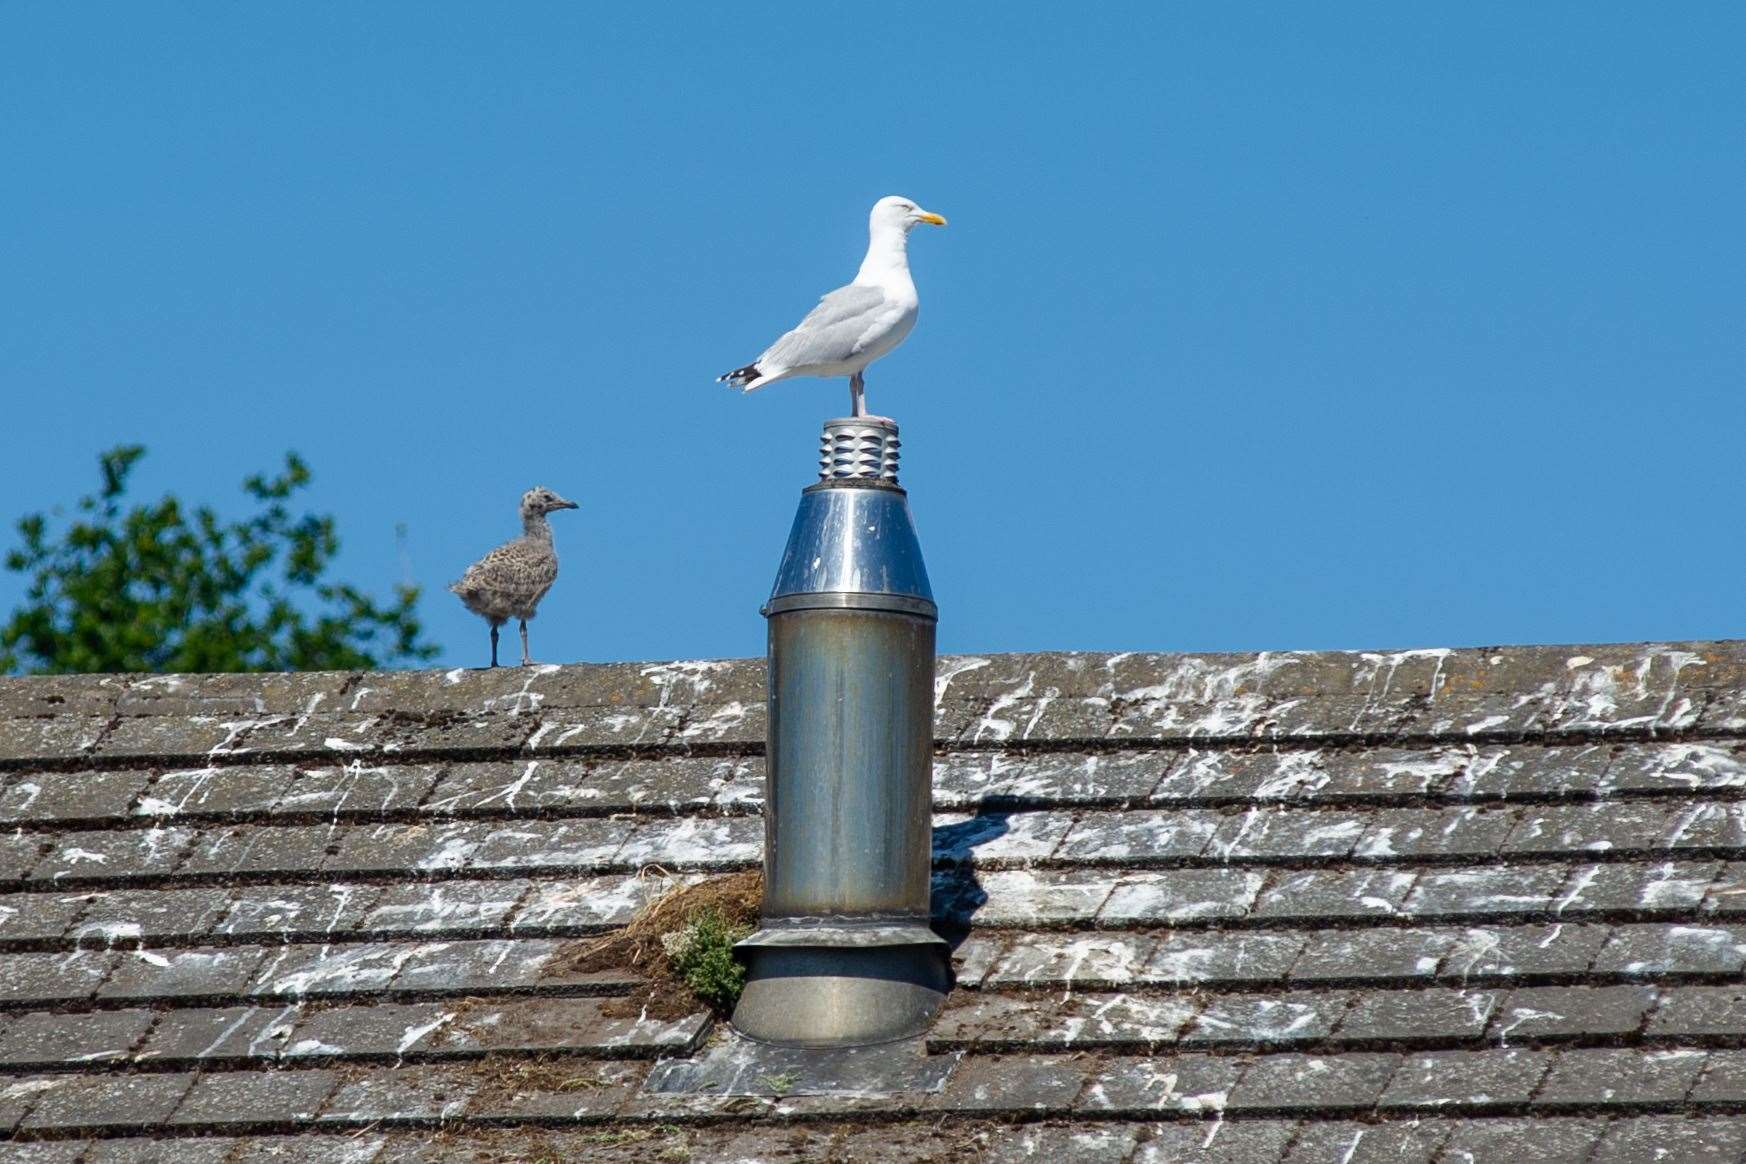 The nesting of seagulls on household roofs is an ever-growing issue in the Forbeshill area of Forres. Picture: Daniel Forsyth.